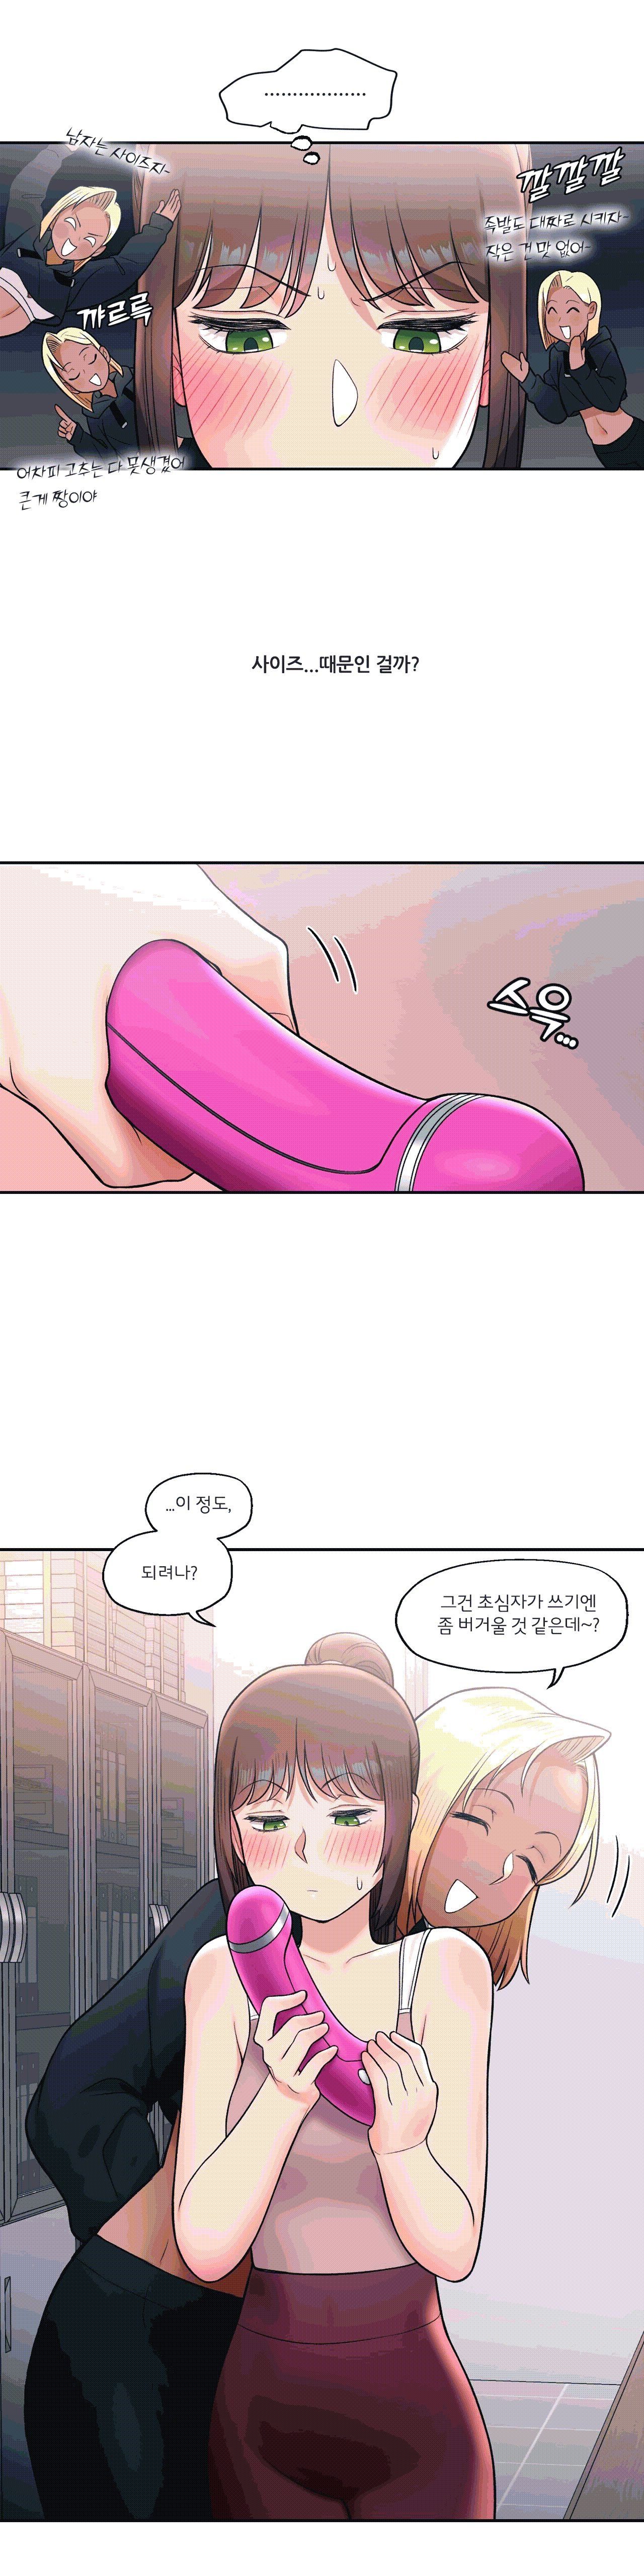 Sexercise Raw - Chapter 29 Page 26